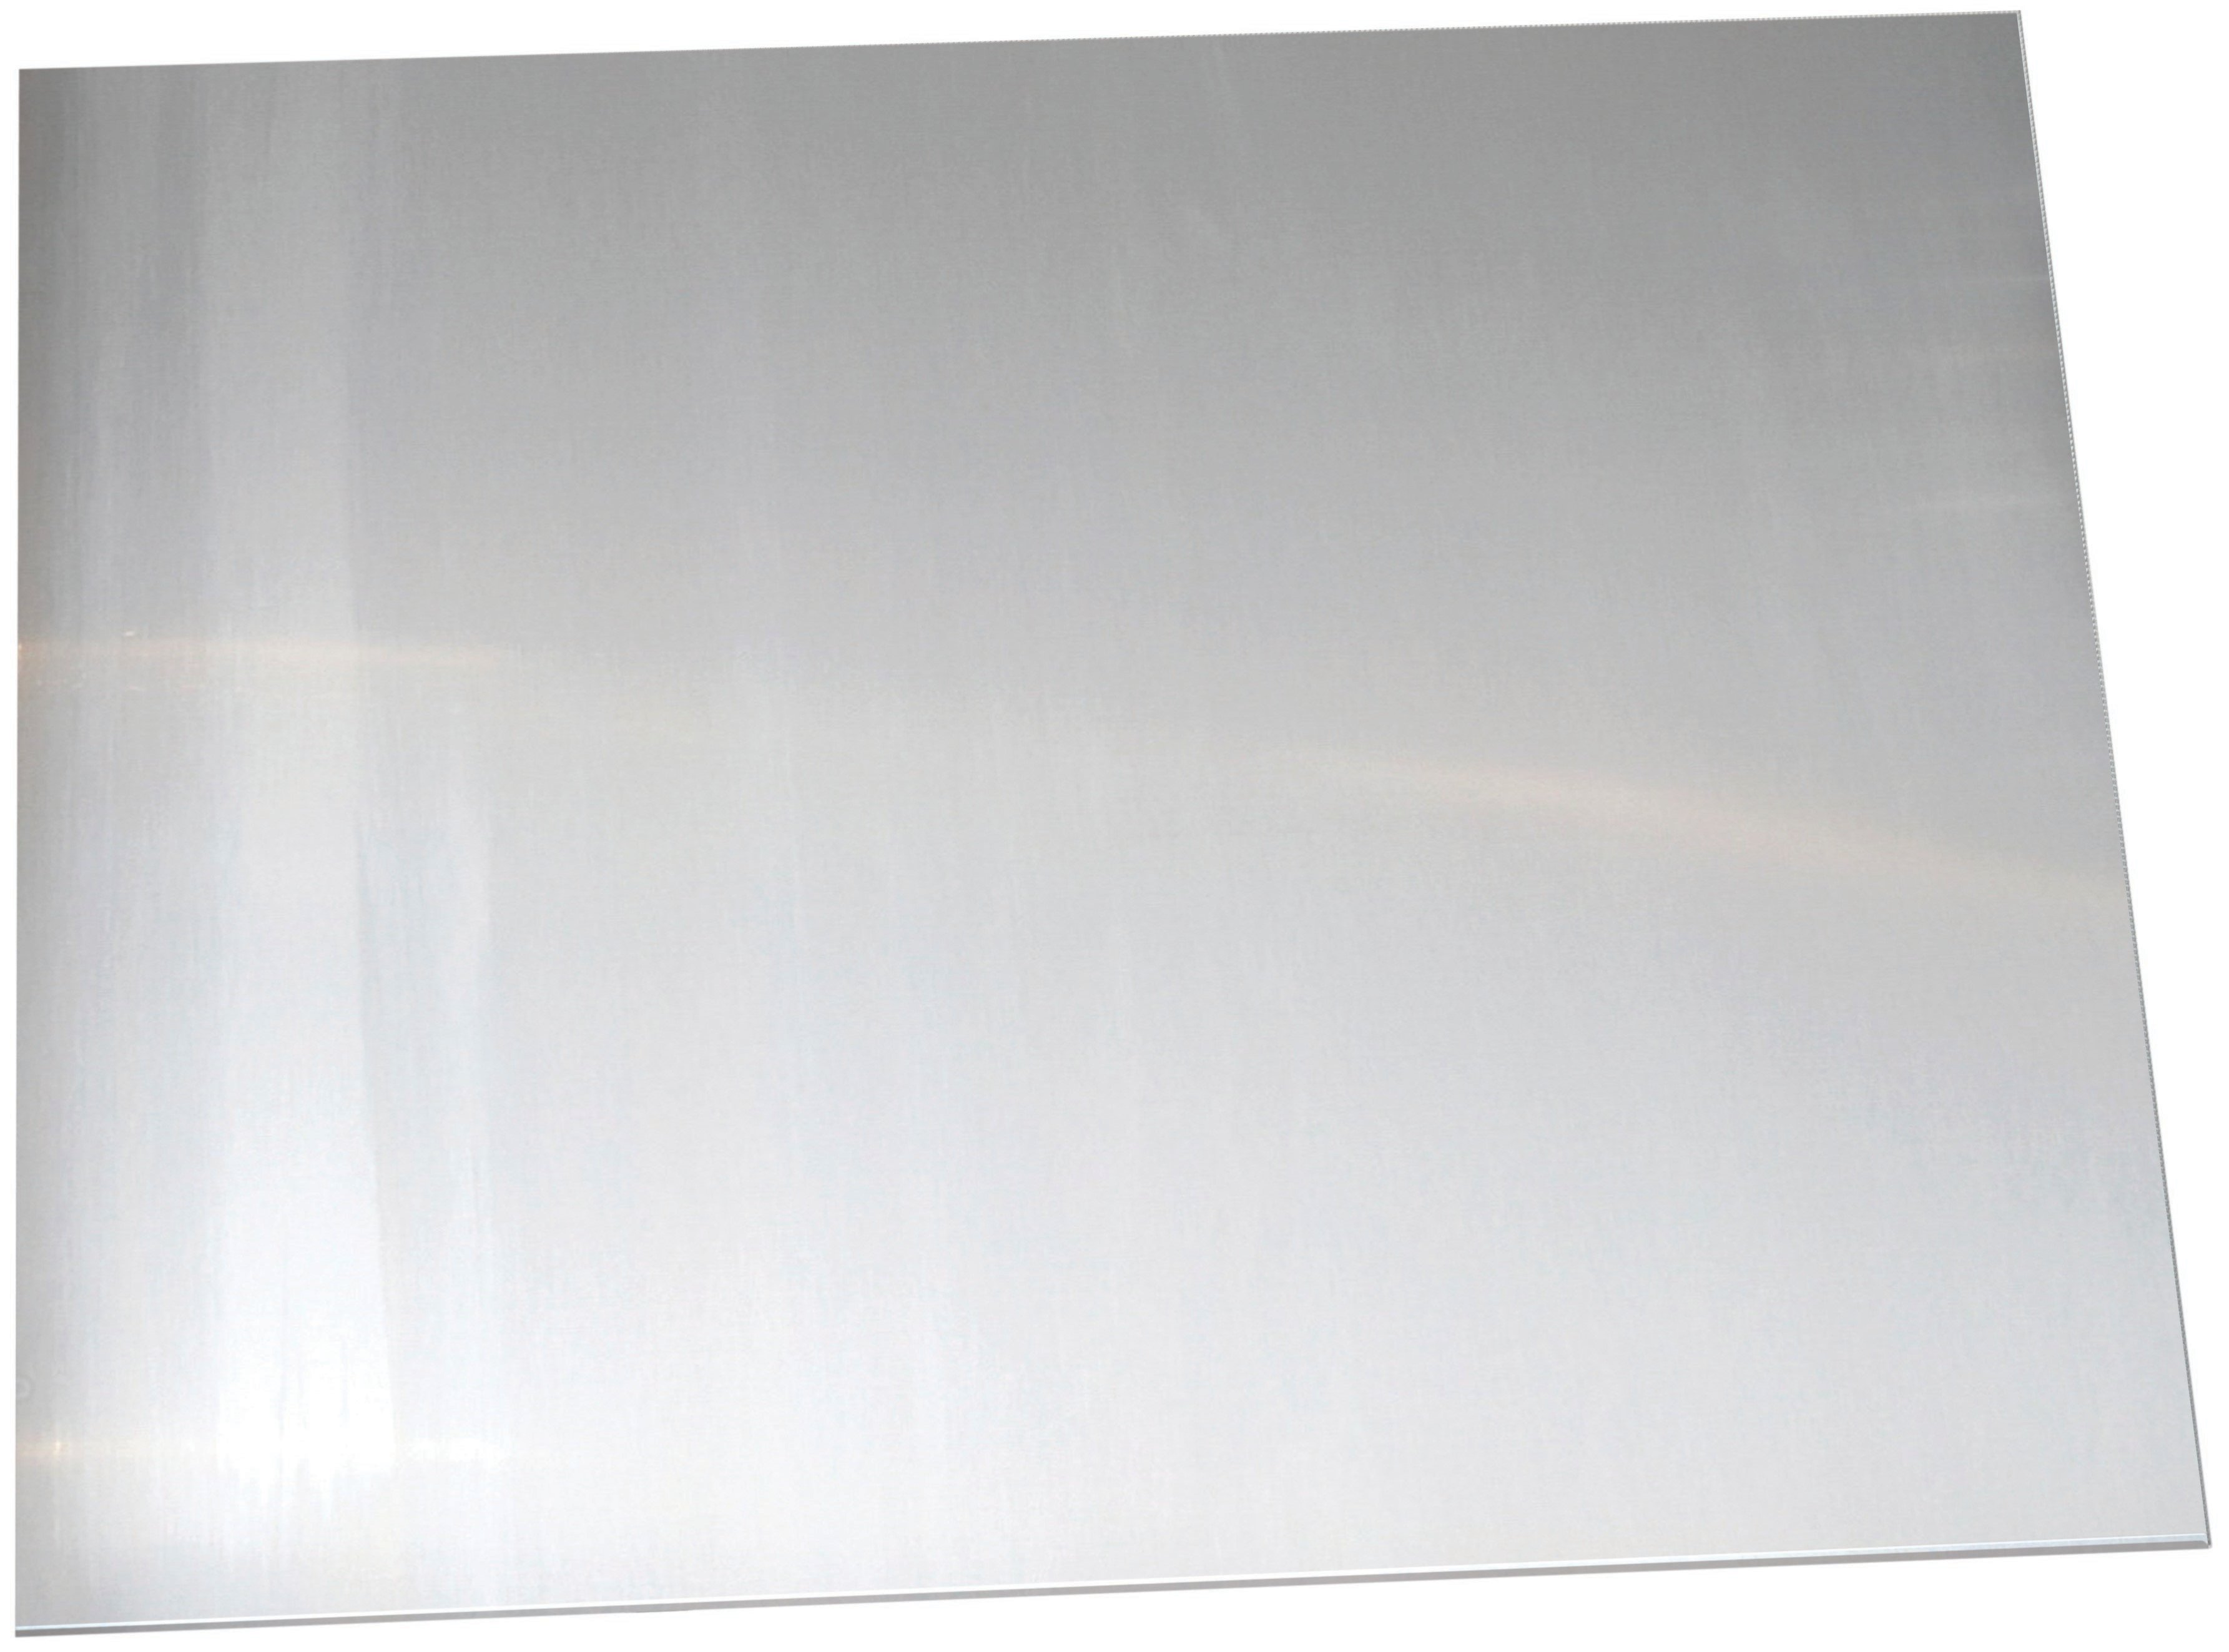 100cm metal splashback without rail ideal to add a stylish yet practical twist to your kitchen.